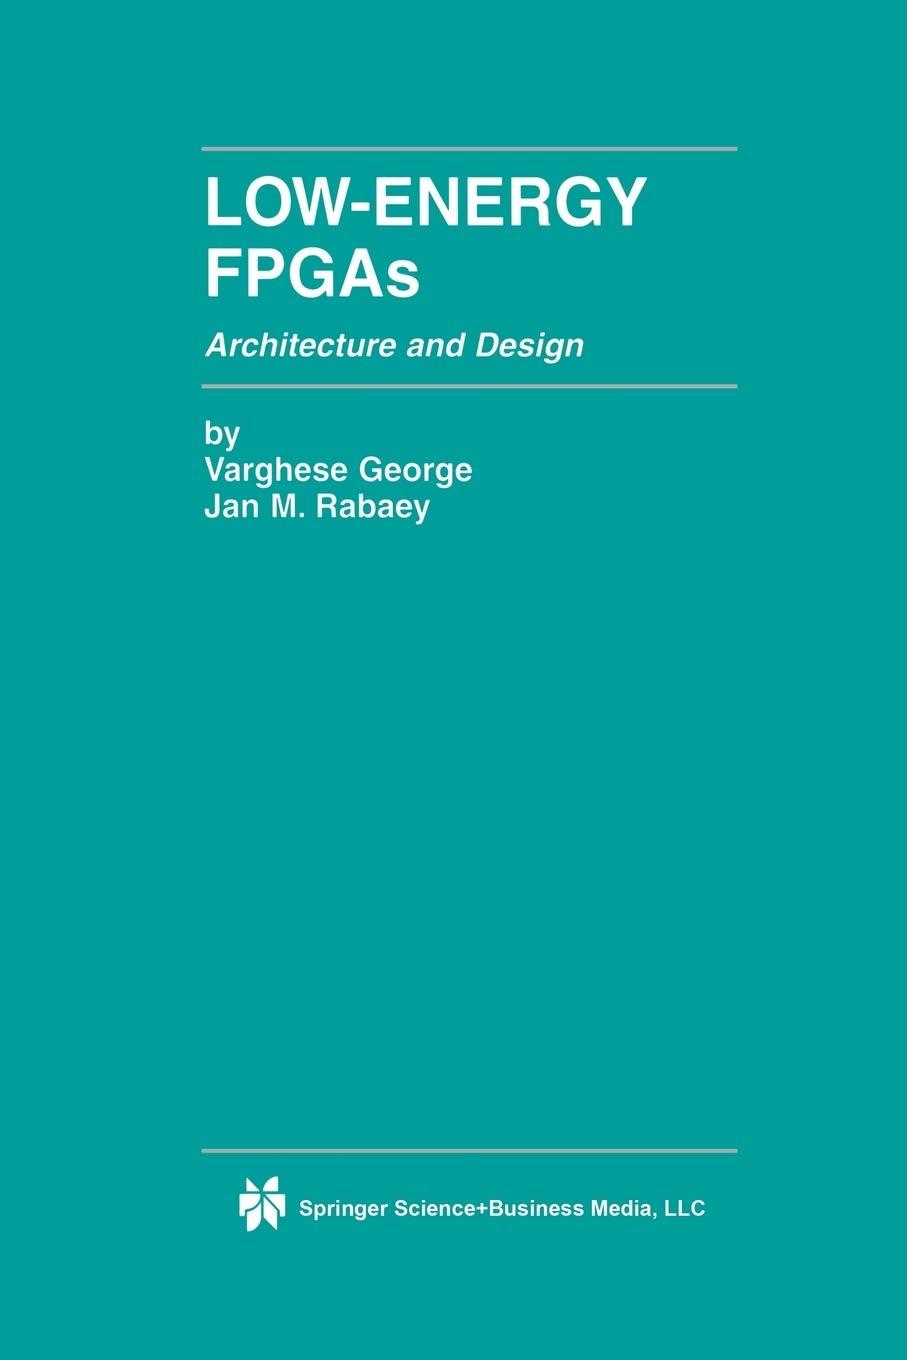 low-energy fpgas architecture and design 2001 edition varghese george, jan m. rabaey 1461355451,